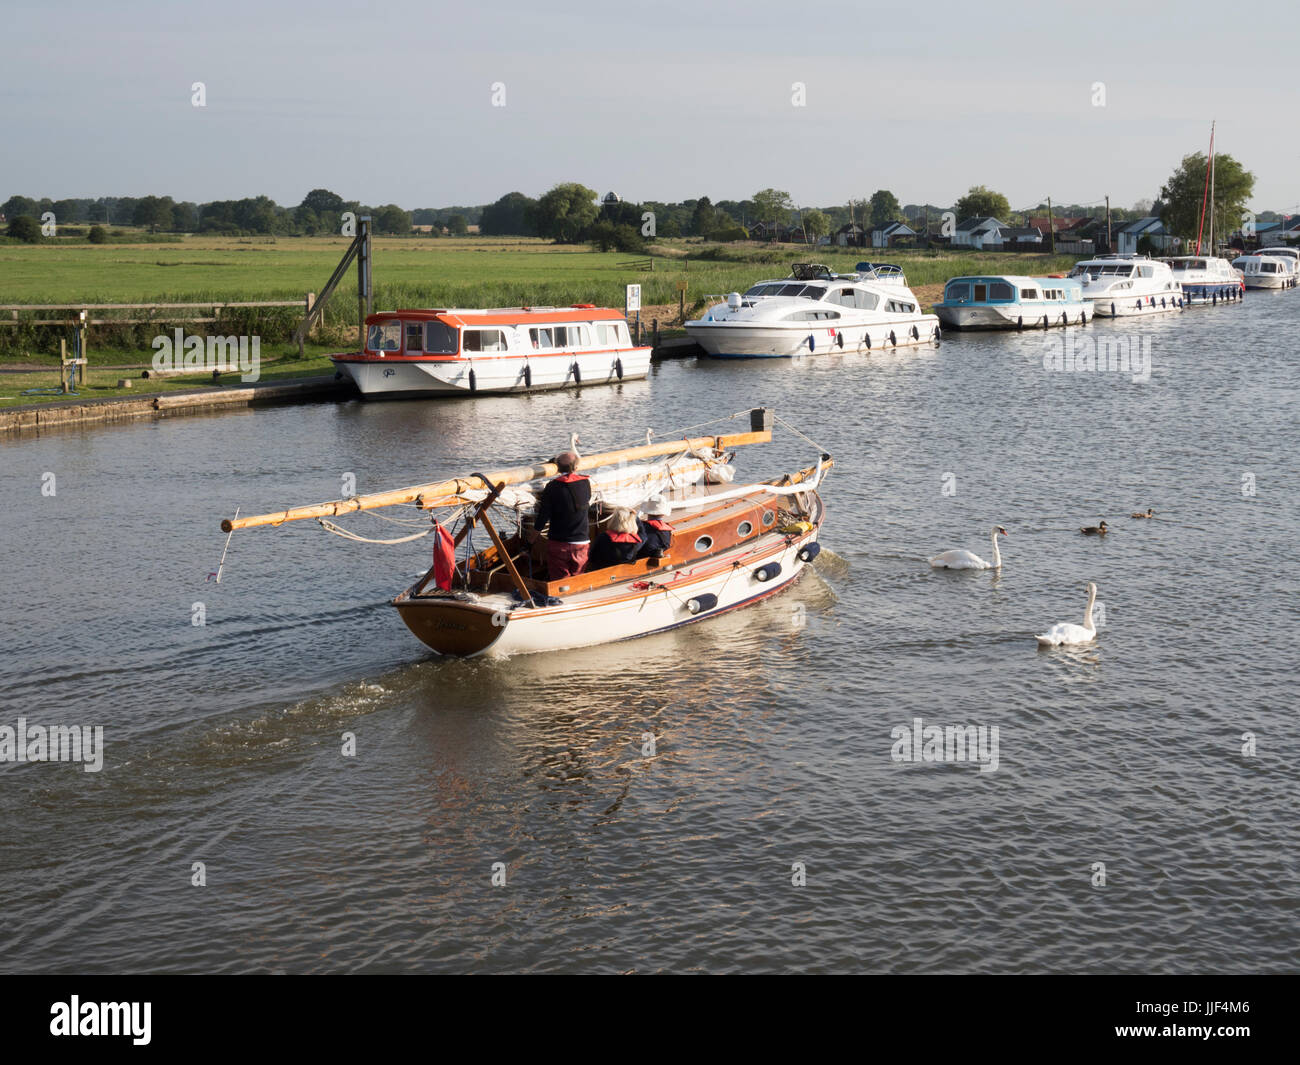 A yacht navigates the River Thurne at Potter Heigham on the Norfolk Broads UK in evening sunlight in summer Stock Photo